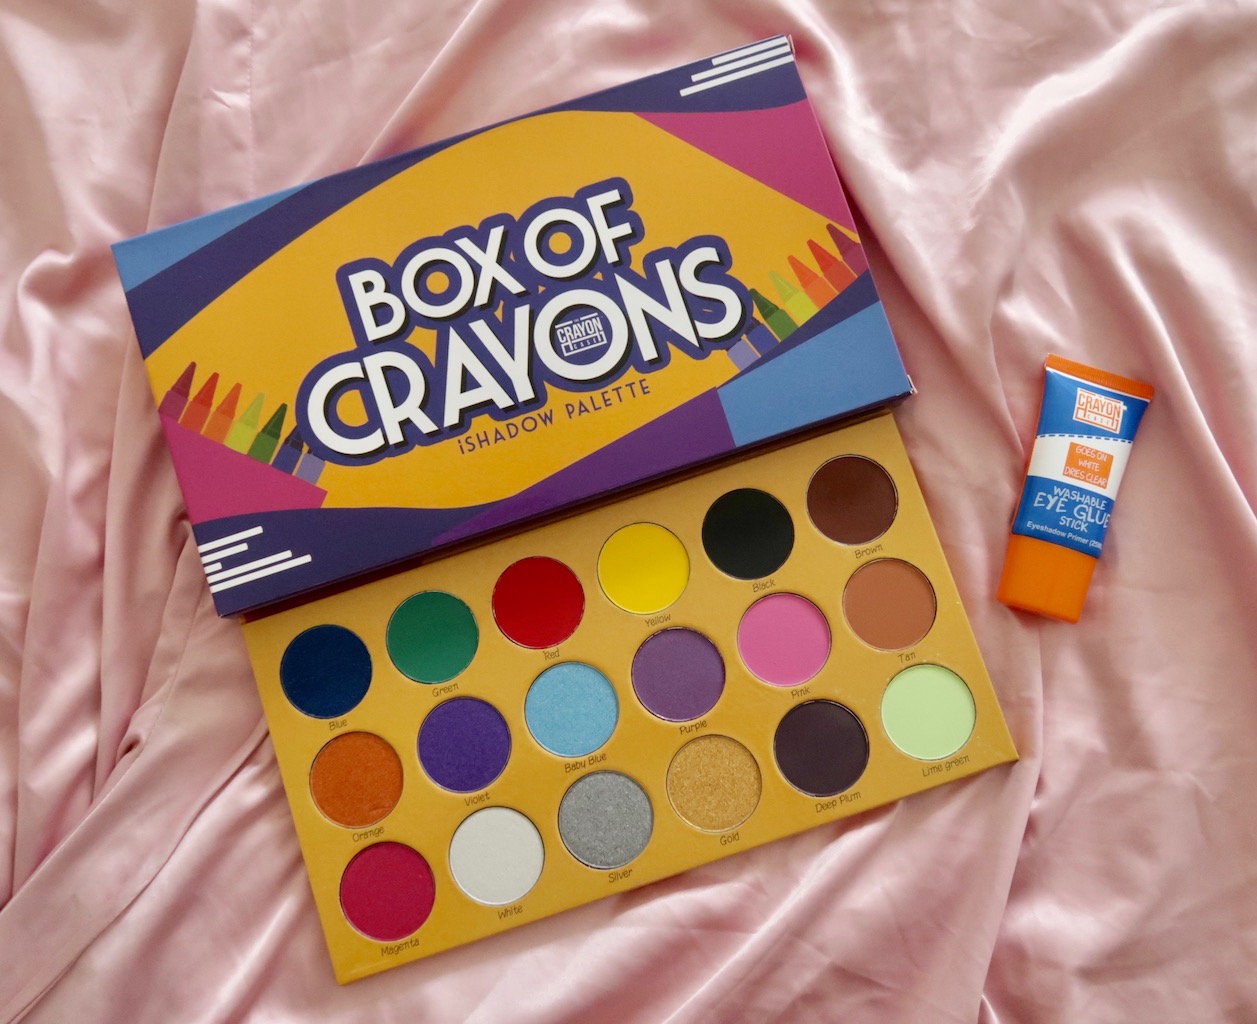 Box of Crayons Eyeshadow Palette and Washable Eye Glue Stick Primer: Online  sensation eye makeup products!